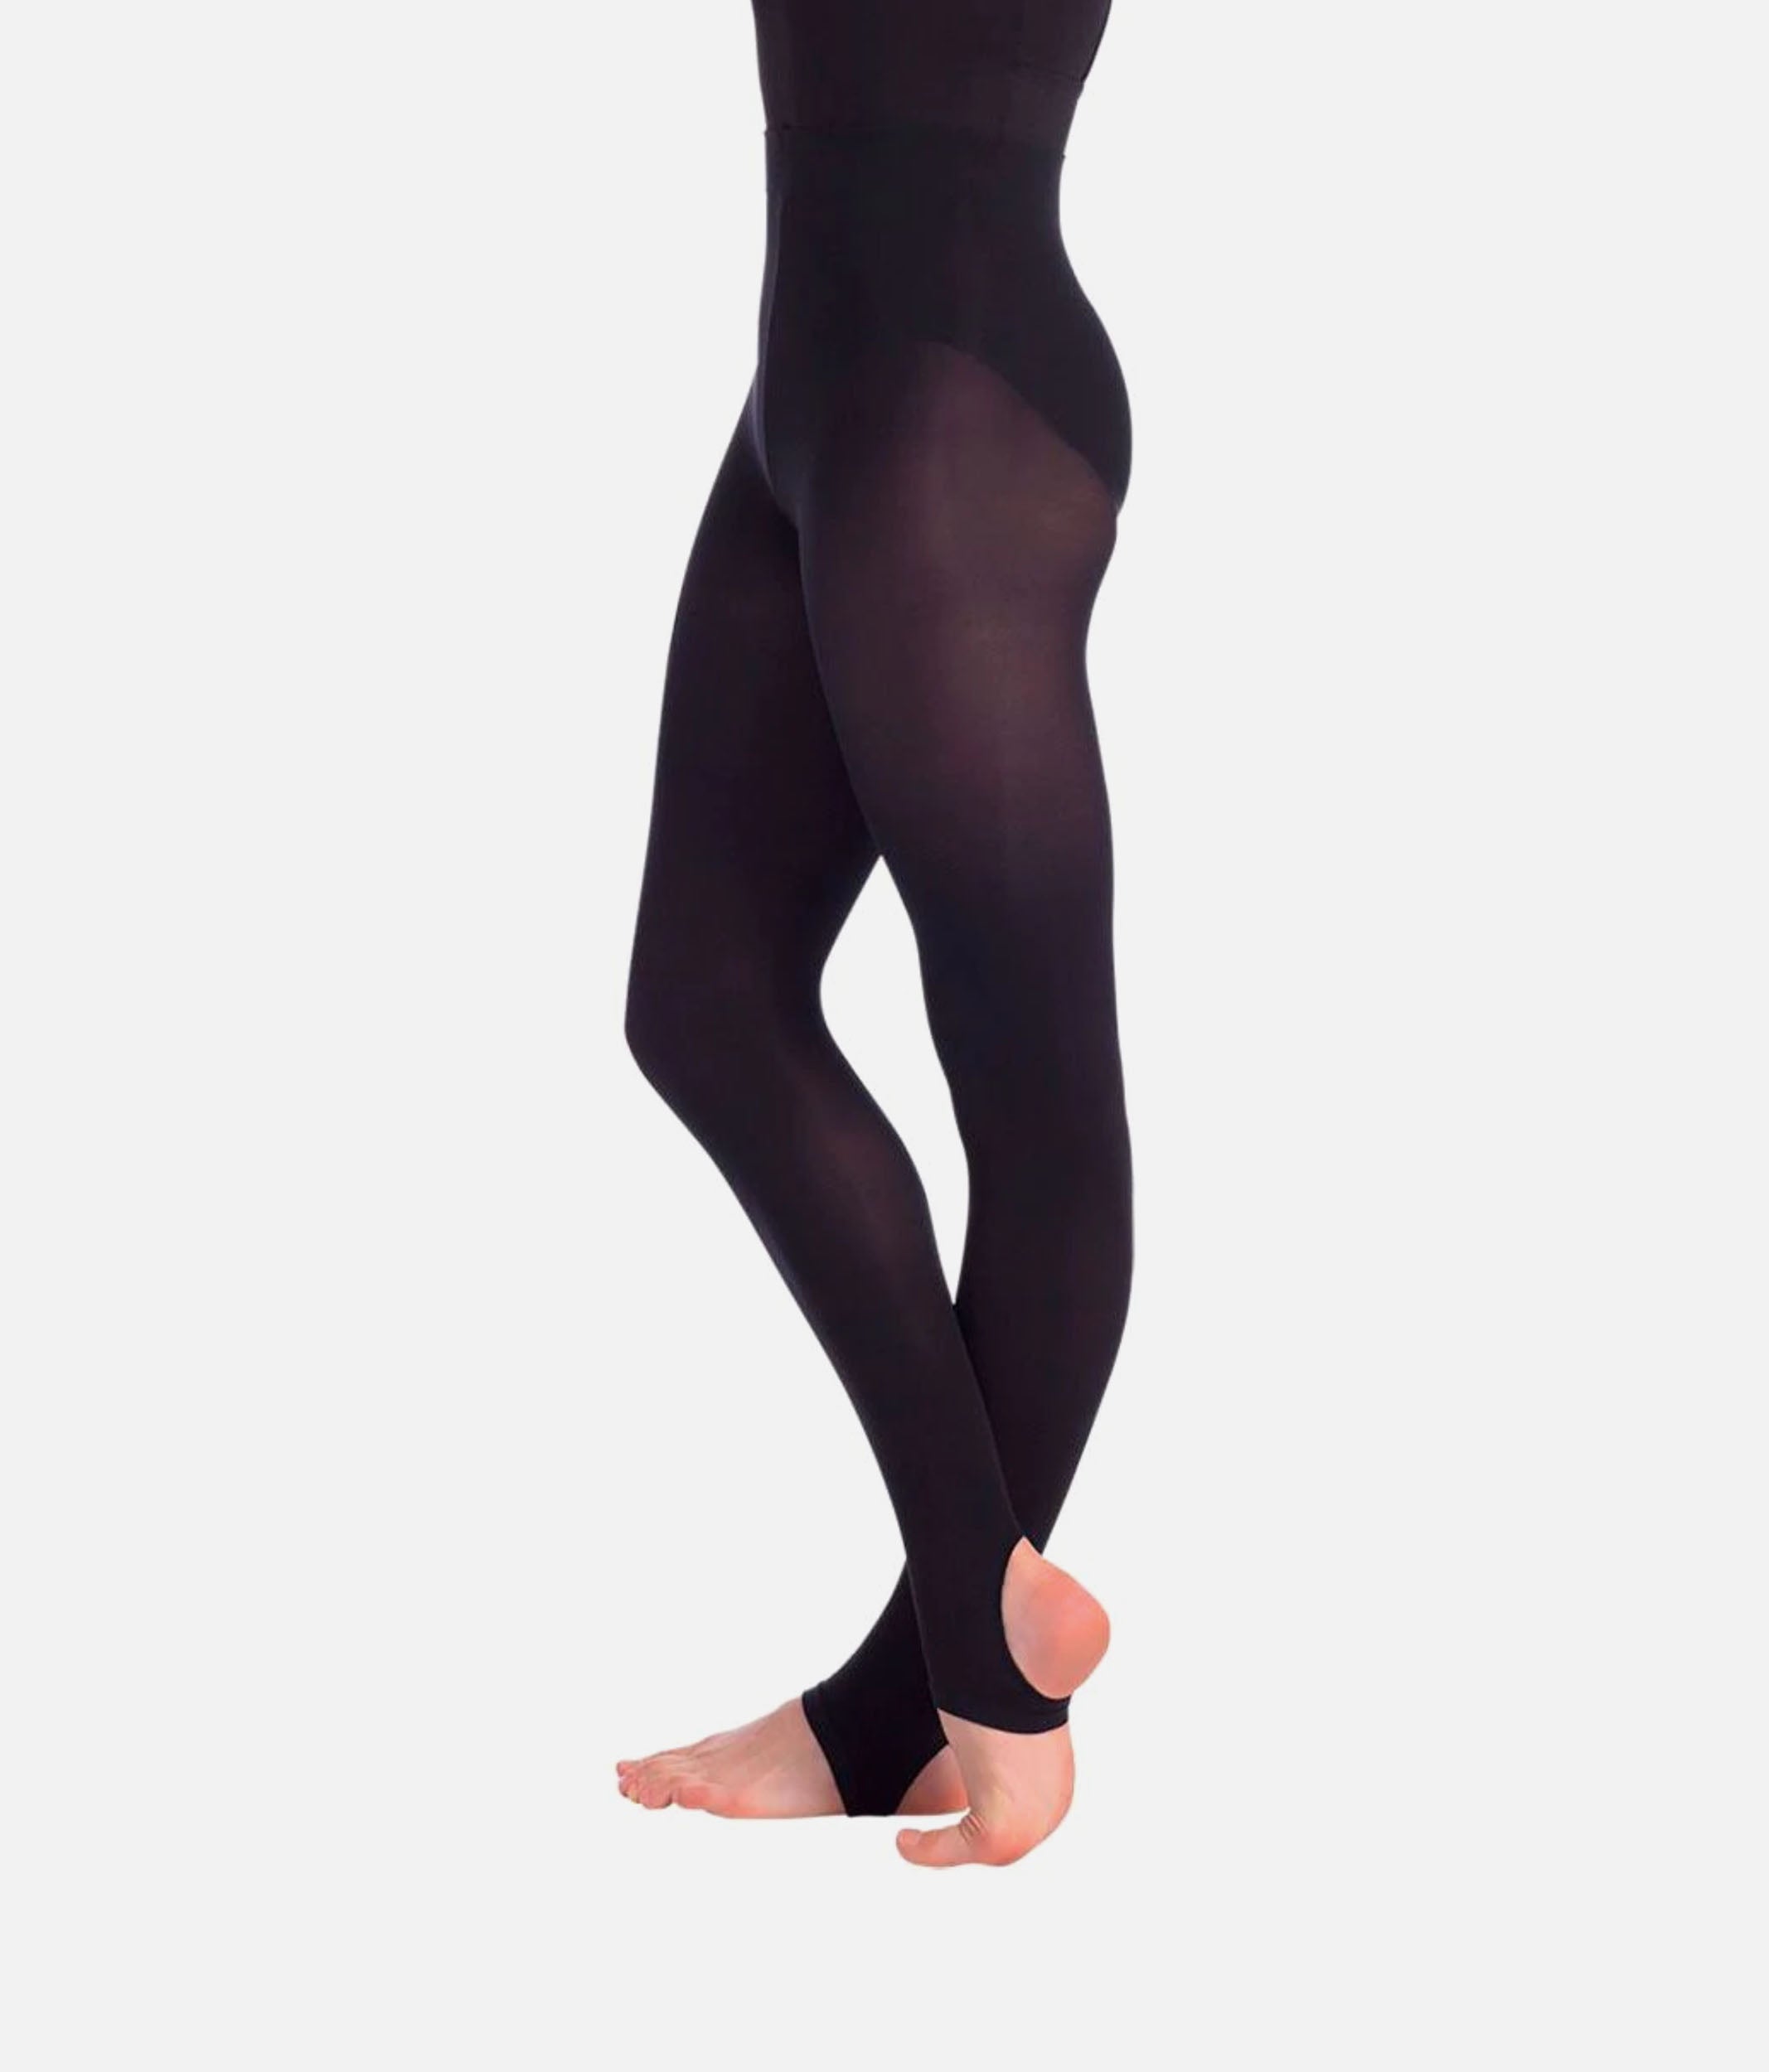 Debut Seamed Footed Dance Tights, Pink Ballet Tights - Dance World